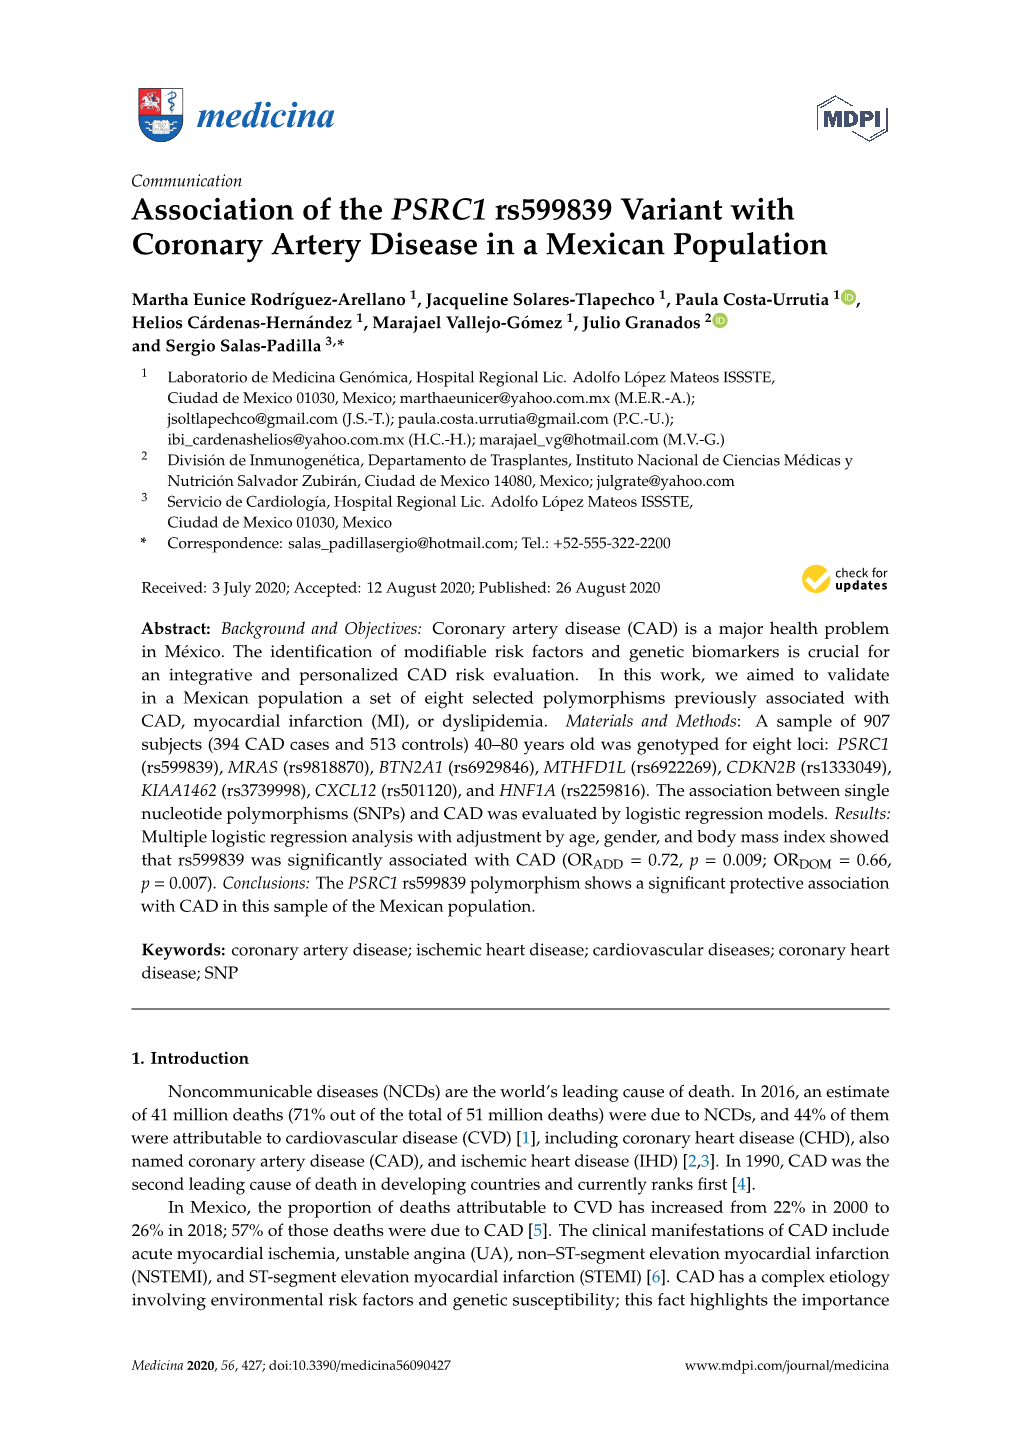 Association of the PSRC1 Rs599839 Variant with Coronary Artery Disease in a Mexican Population